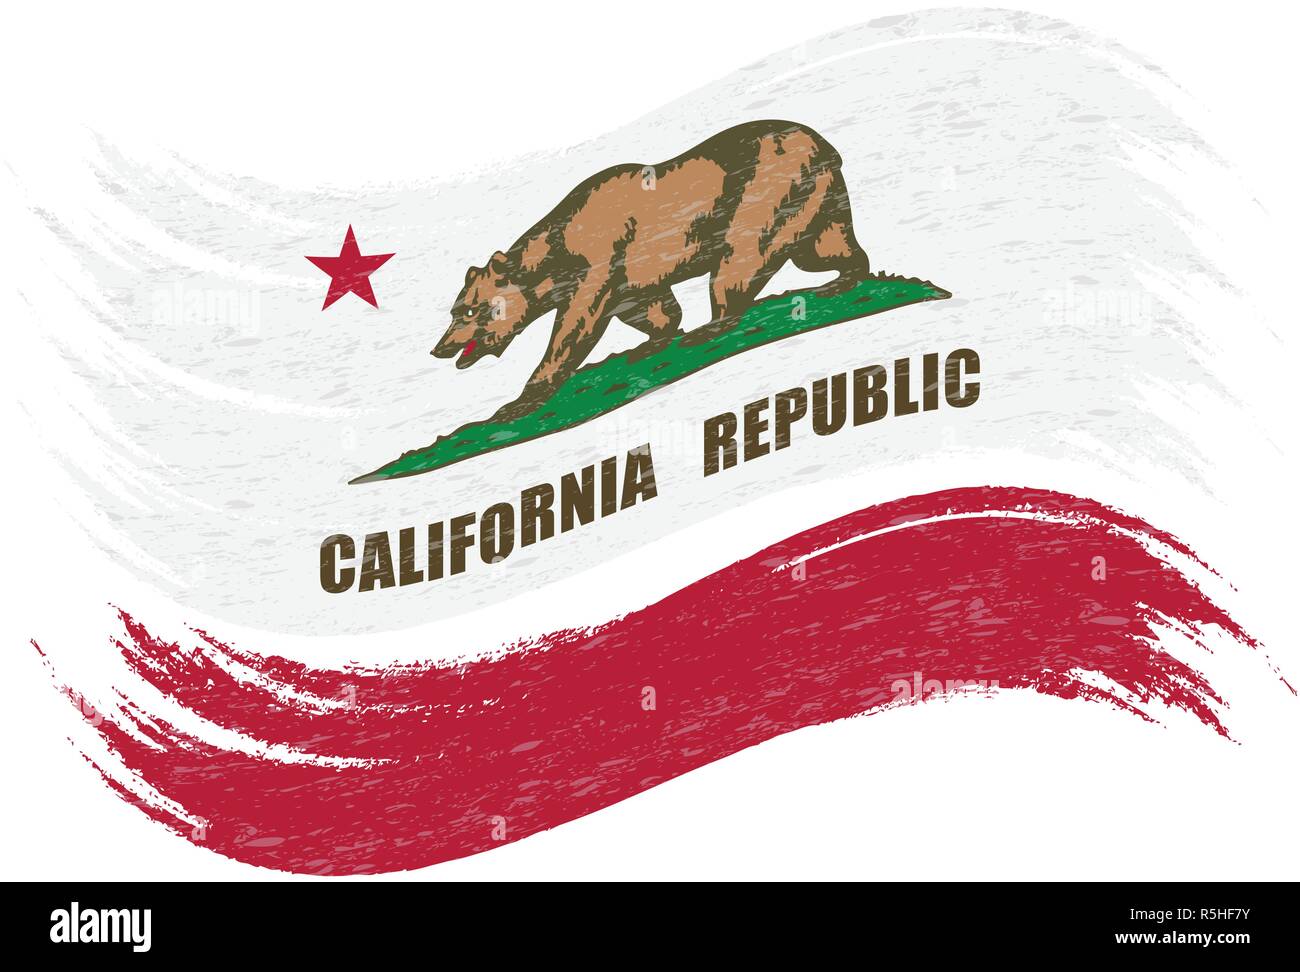 Grunge Brush Stroke With National Flag Of California Isolated On A White Background. Vector Illustration. Stock Vector